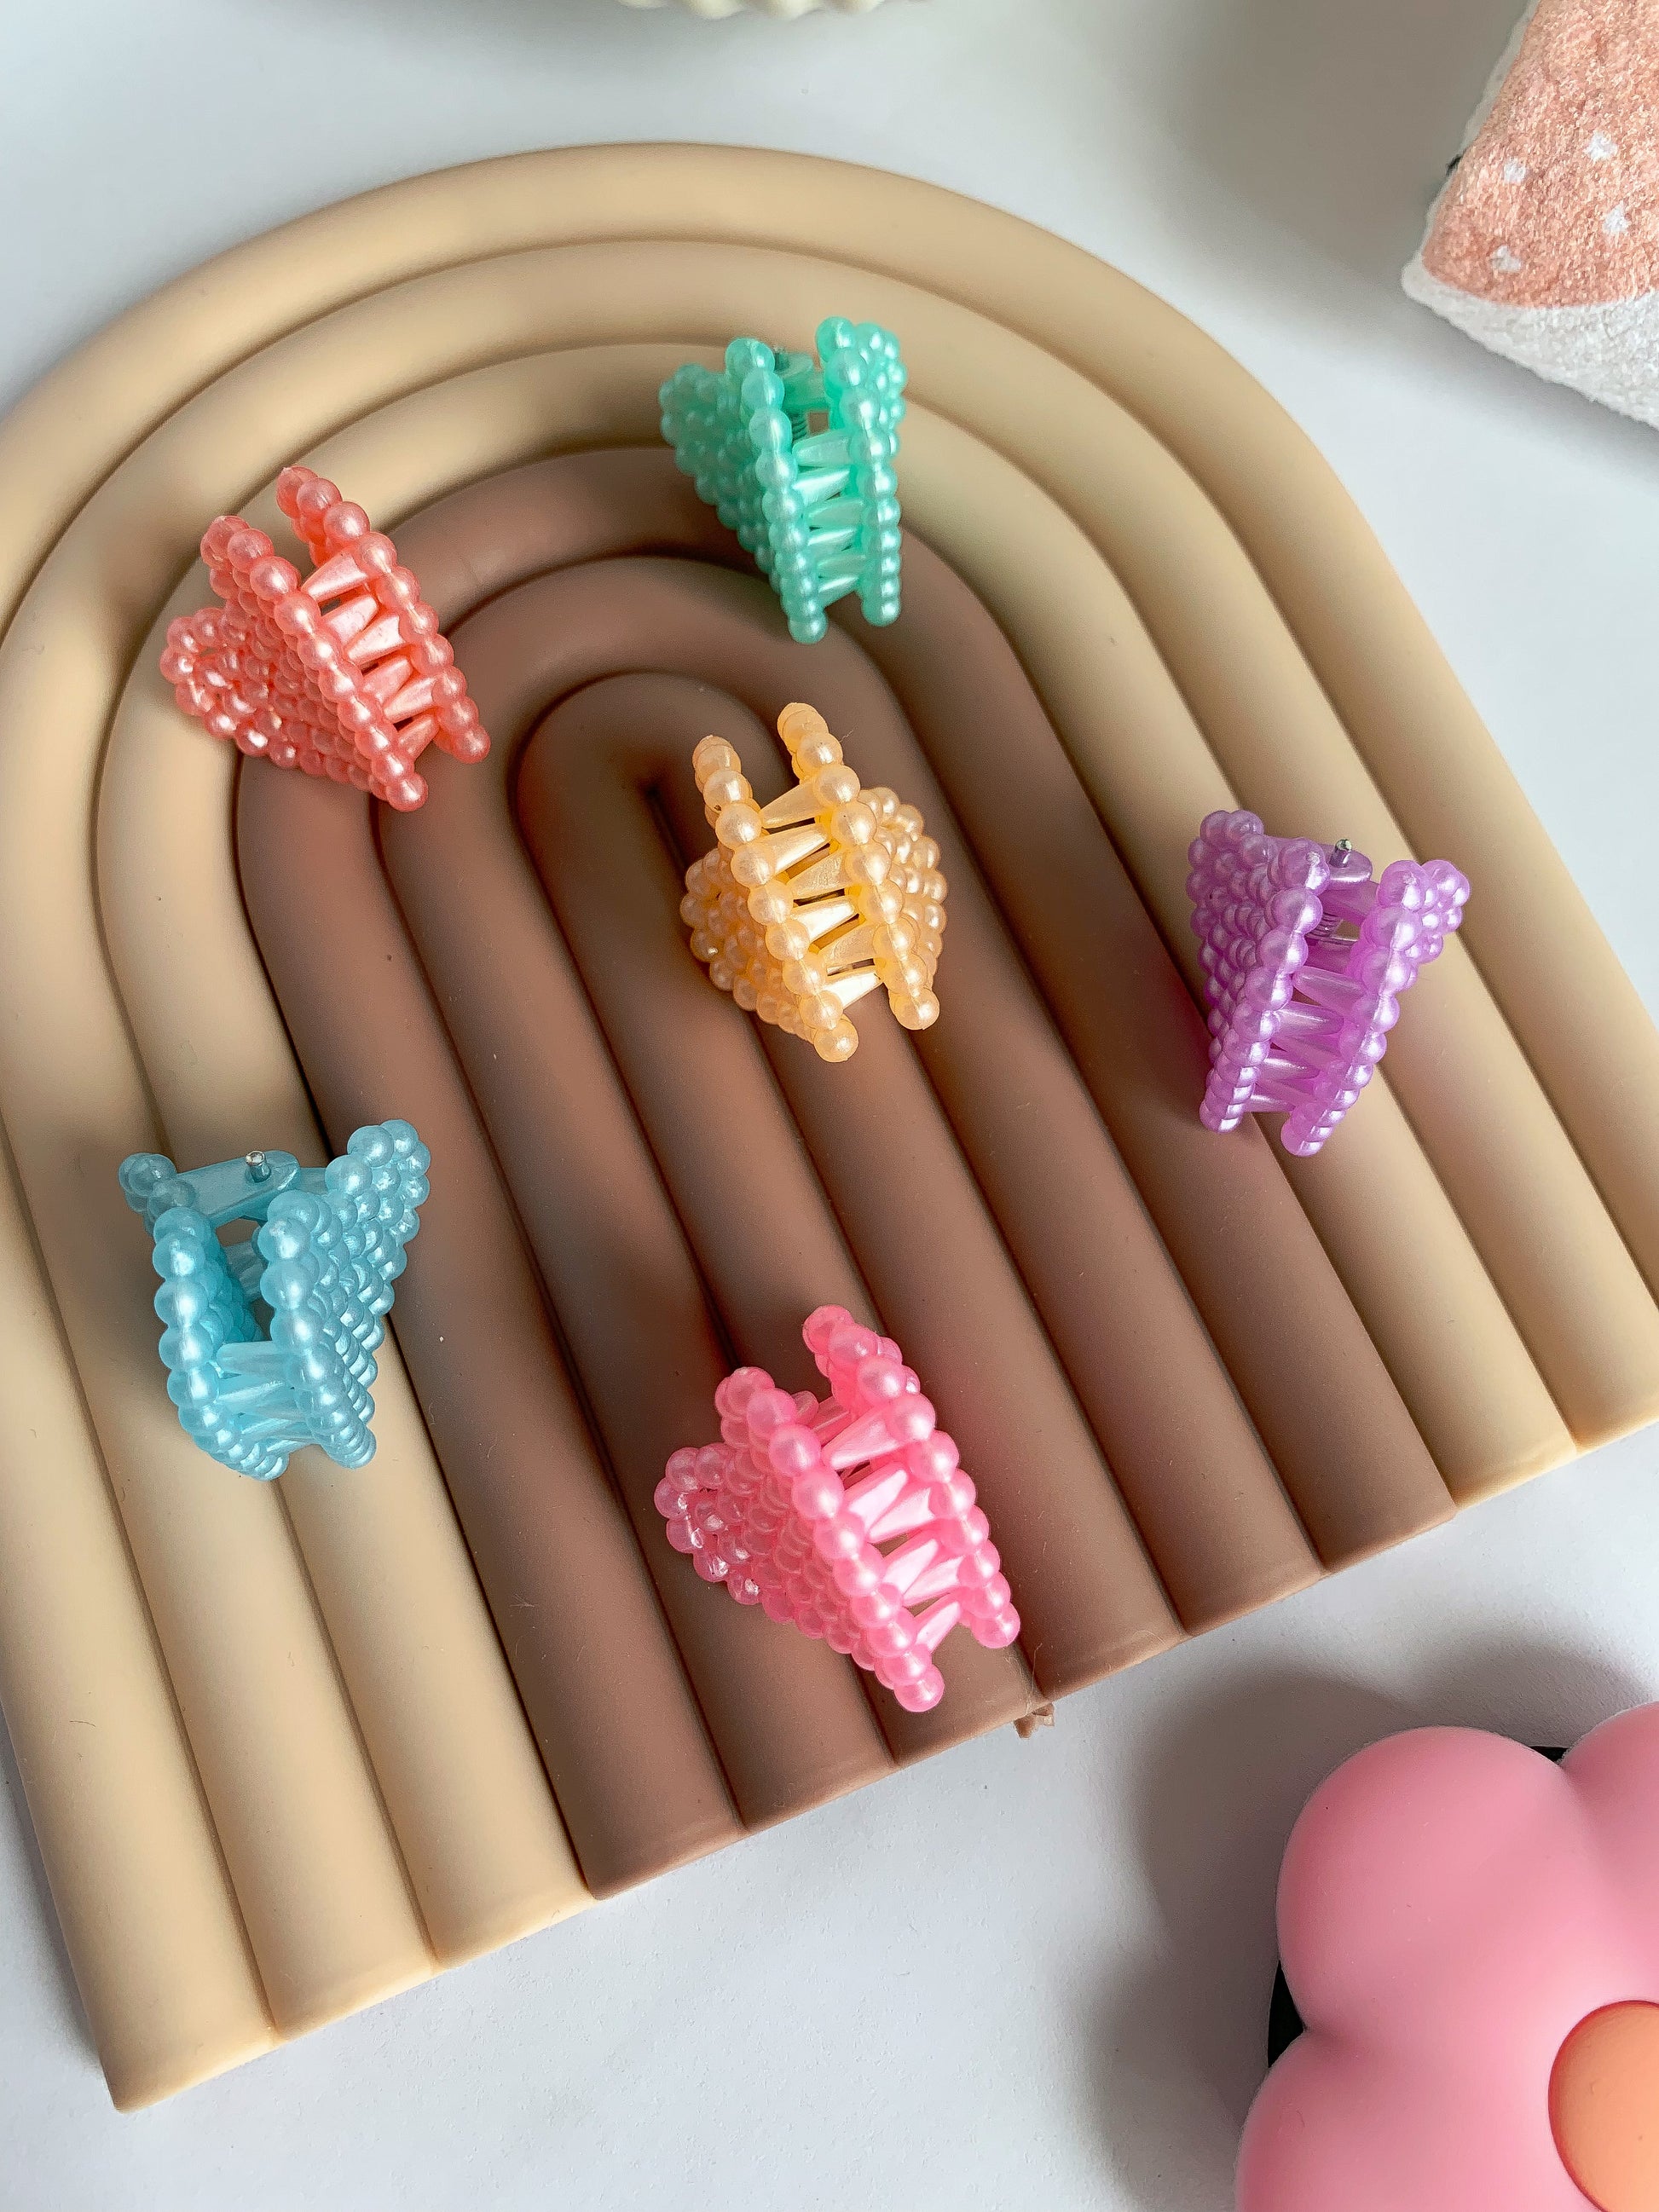 A pack of 6 small, romantic and tender heart claw clips. Each set comes with one of each color: blue, pink, purple, light orange, teal, and rose.